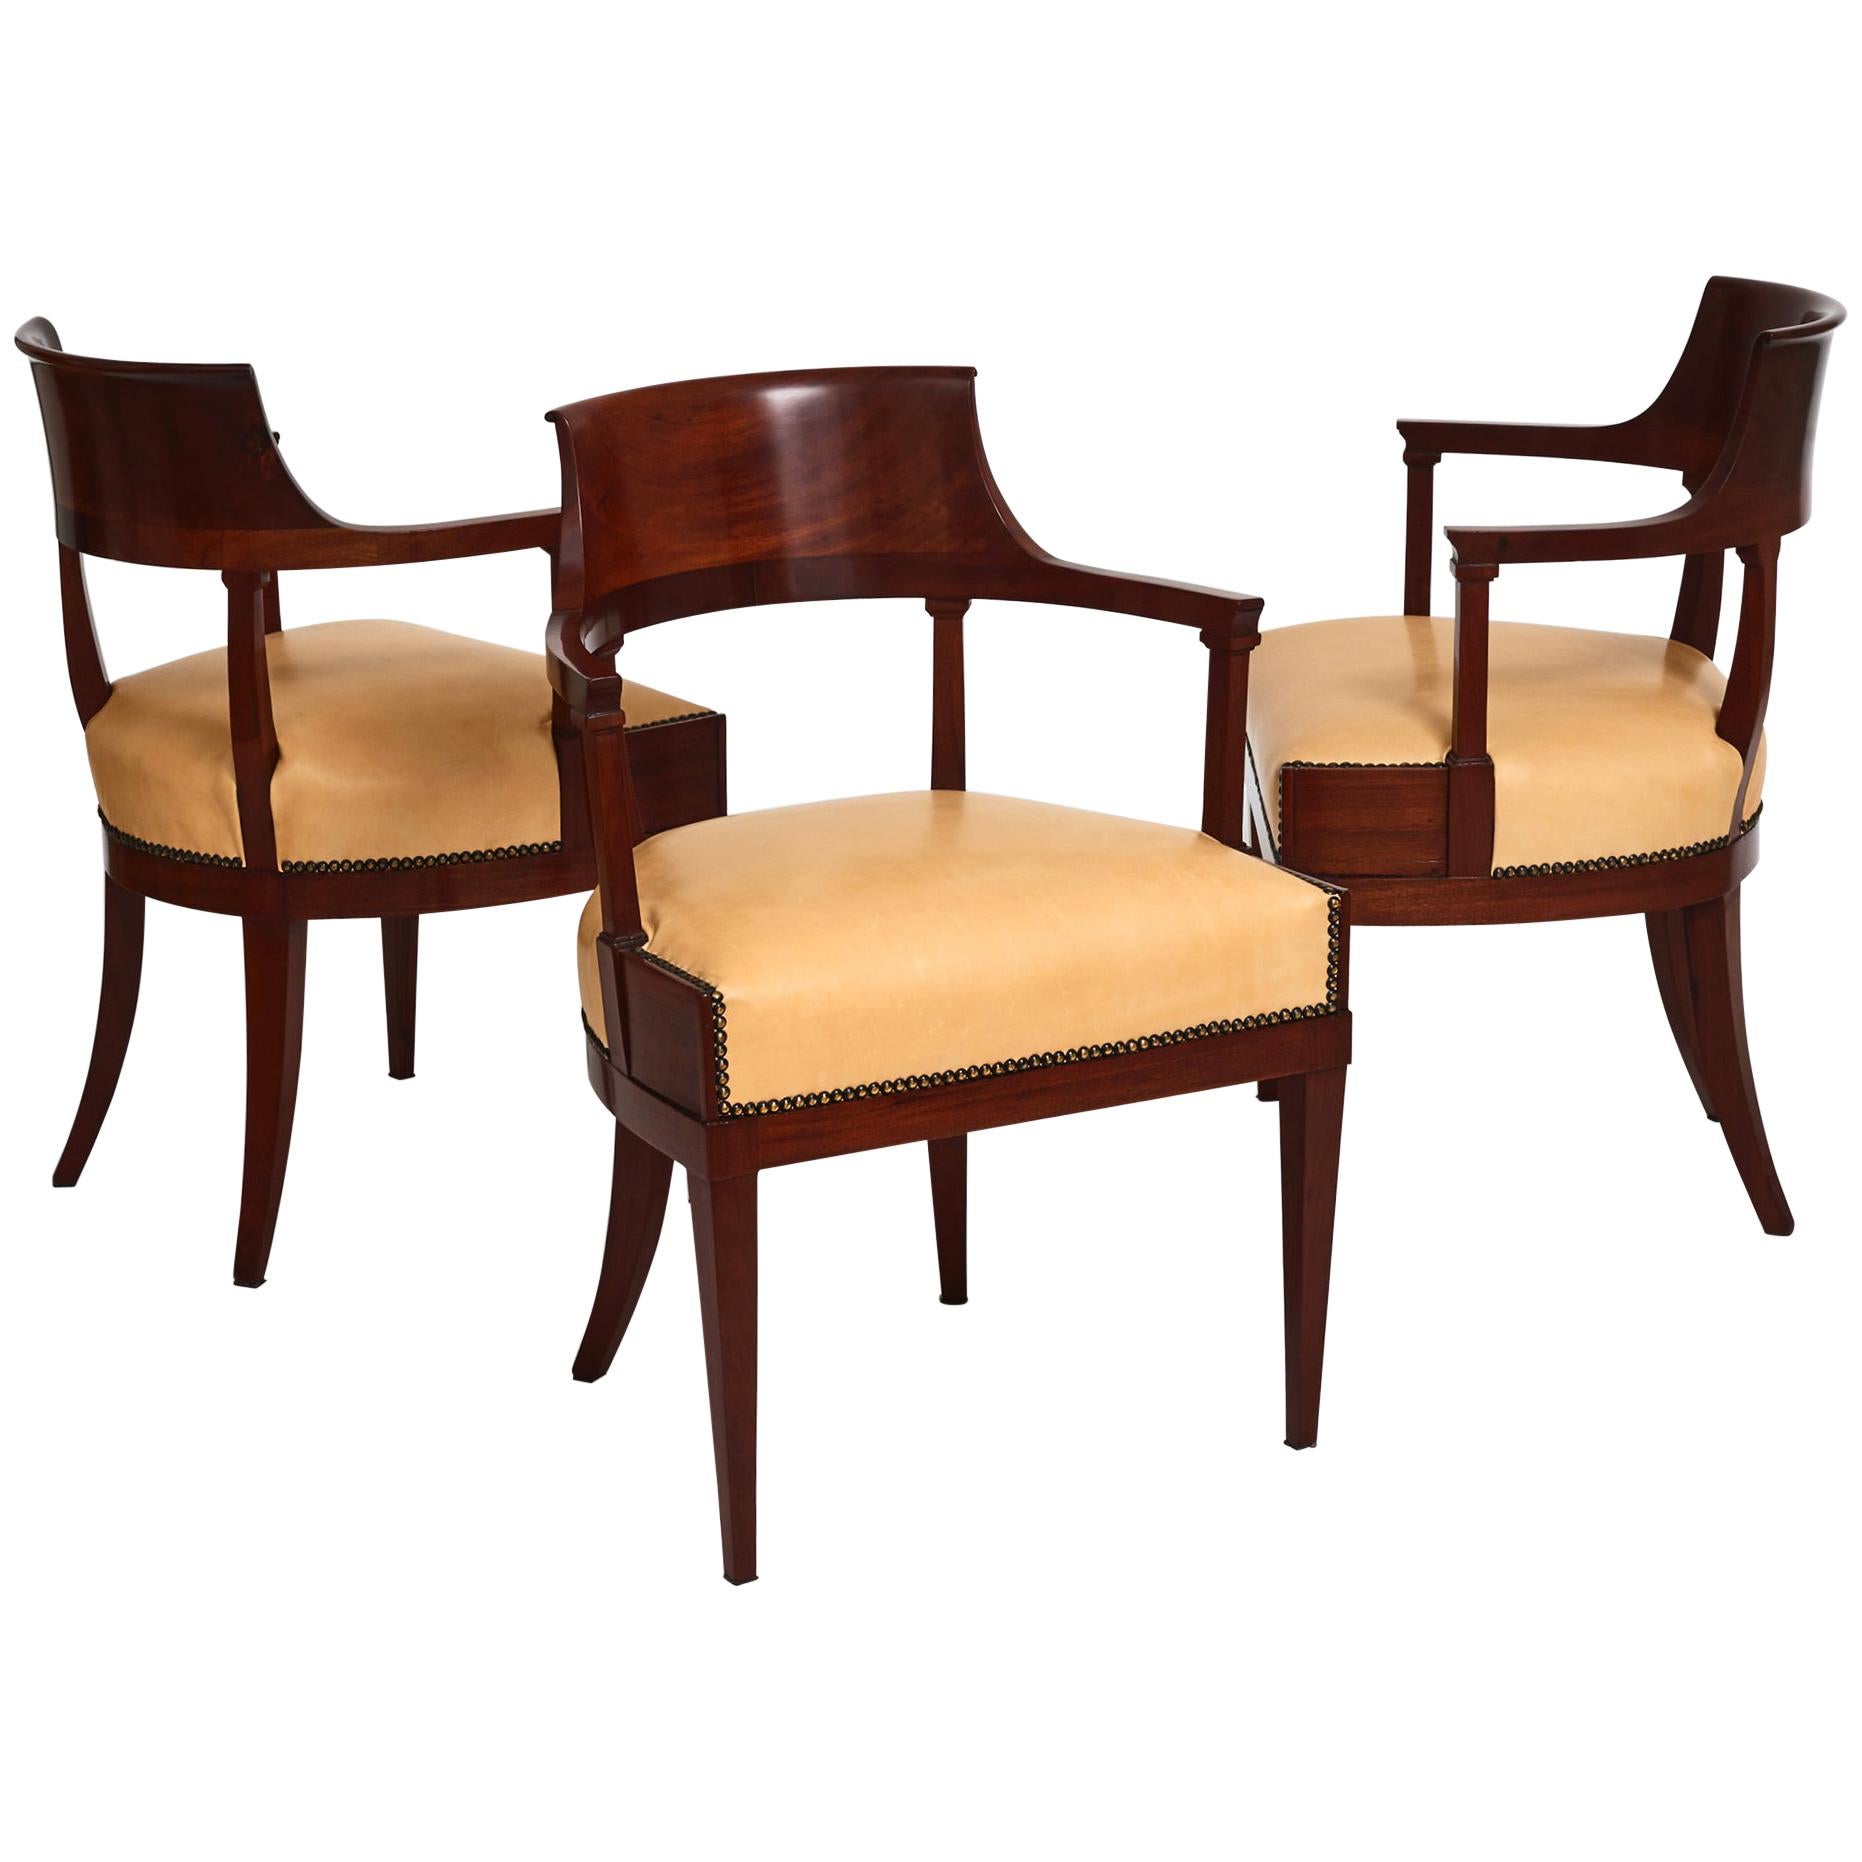 Set of Three Swedish Neoclassical Armchairs, First Quarter of the 19th Century